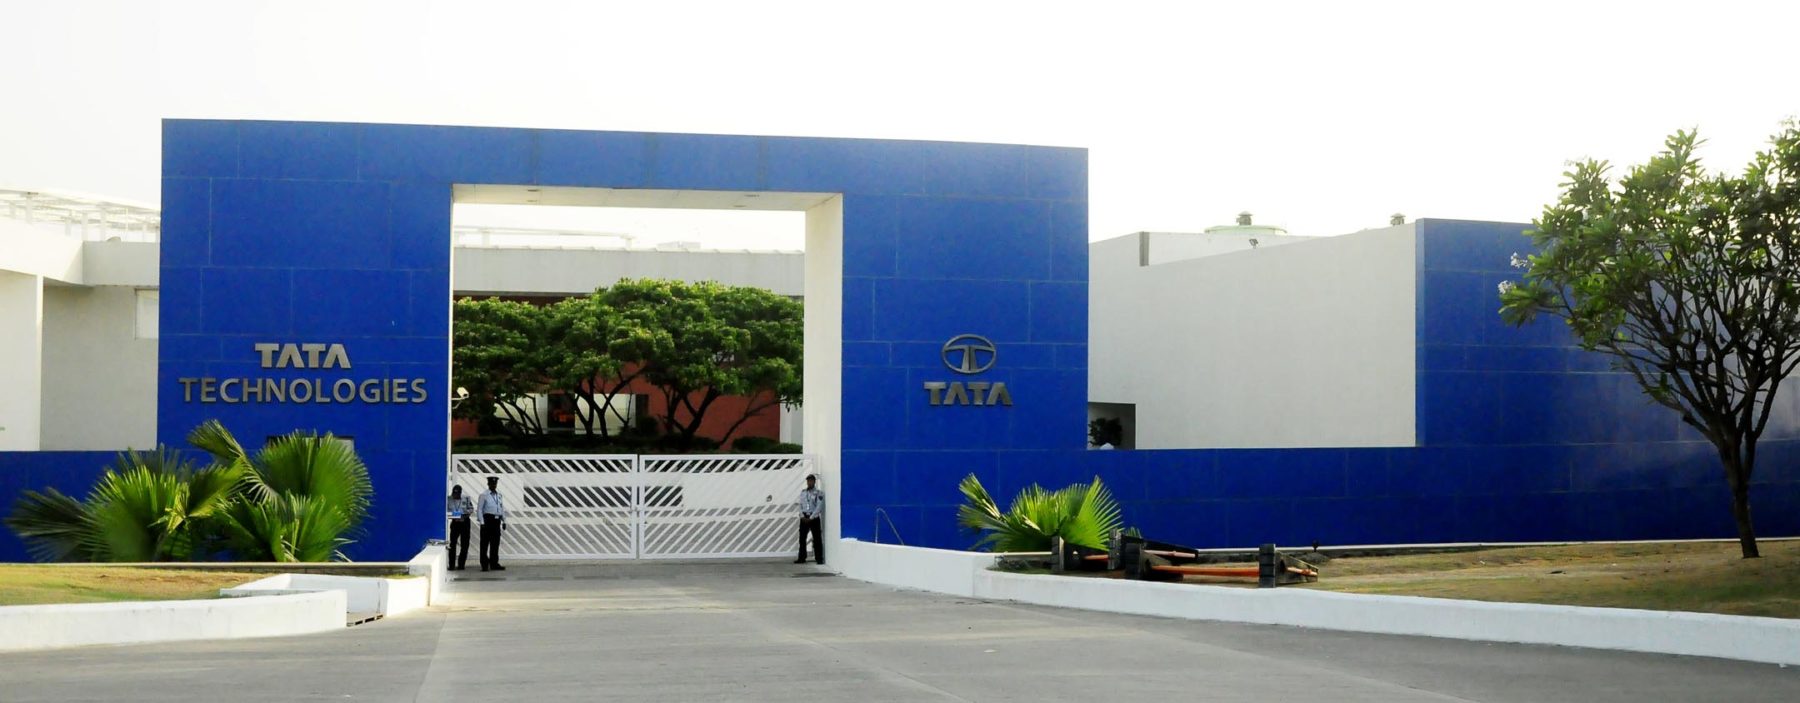 tata-technologies-to-set-up-centers-of-invention-innovation-and-incubation-in-maharashtra